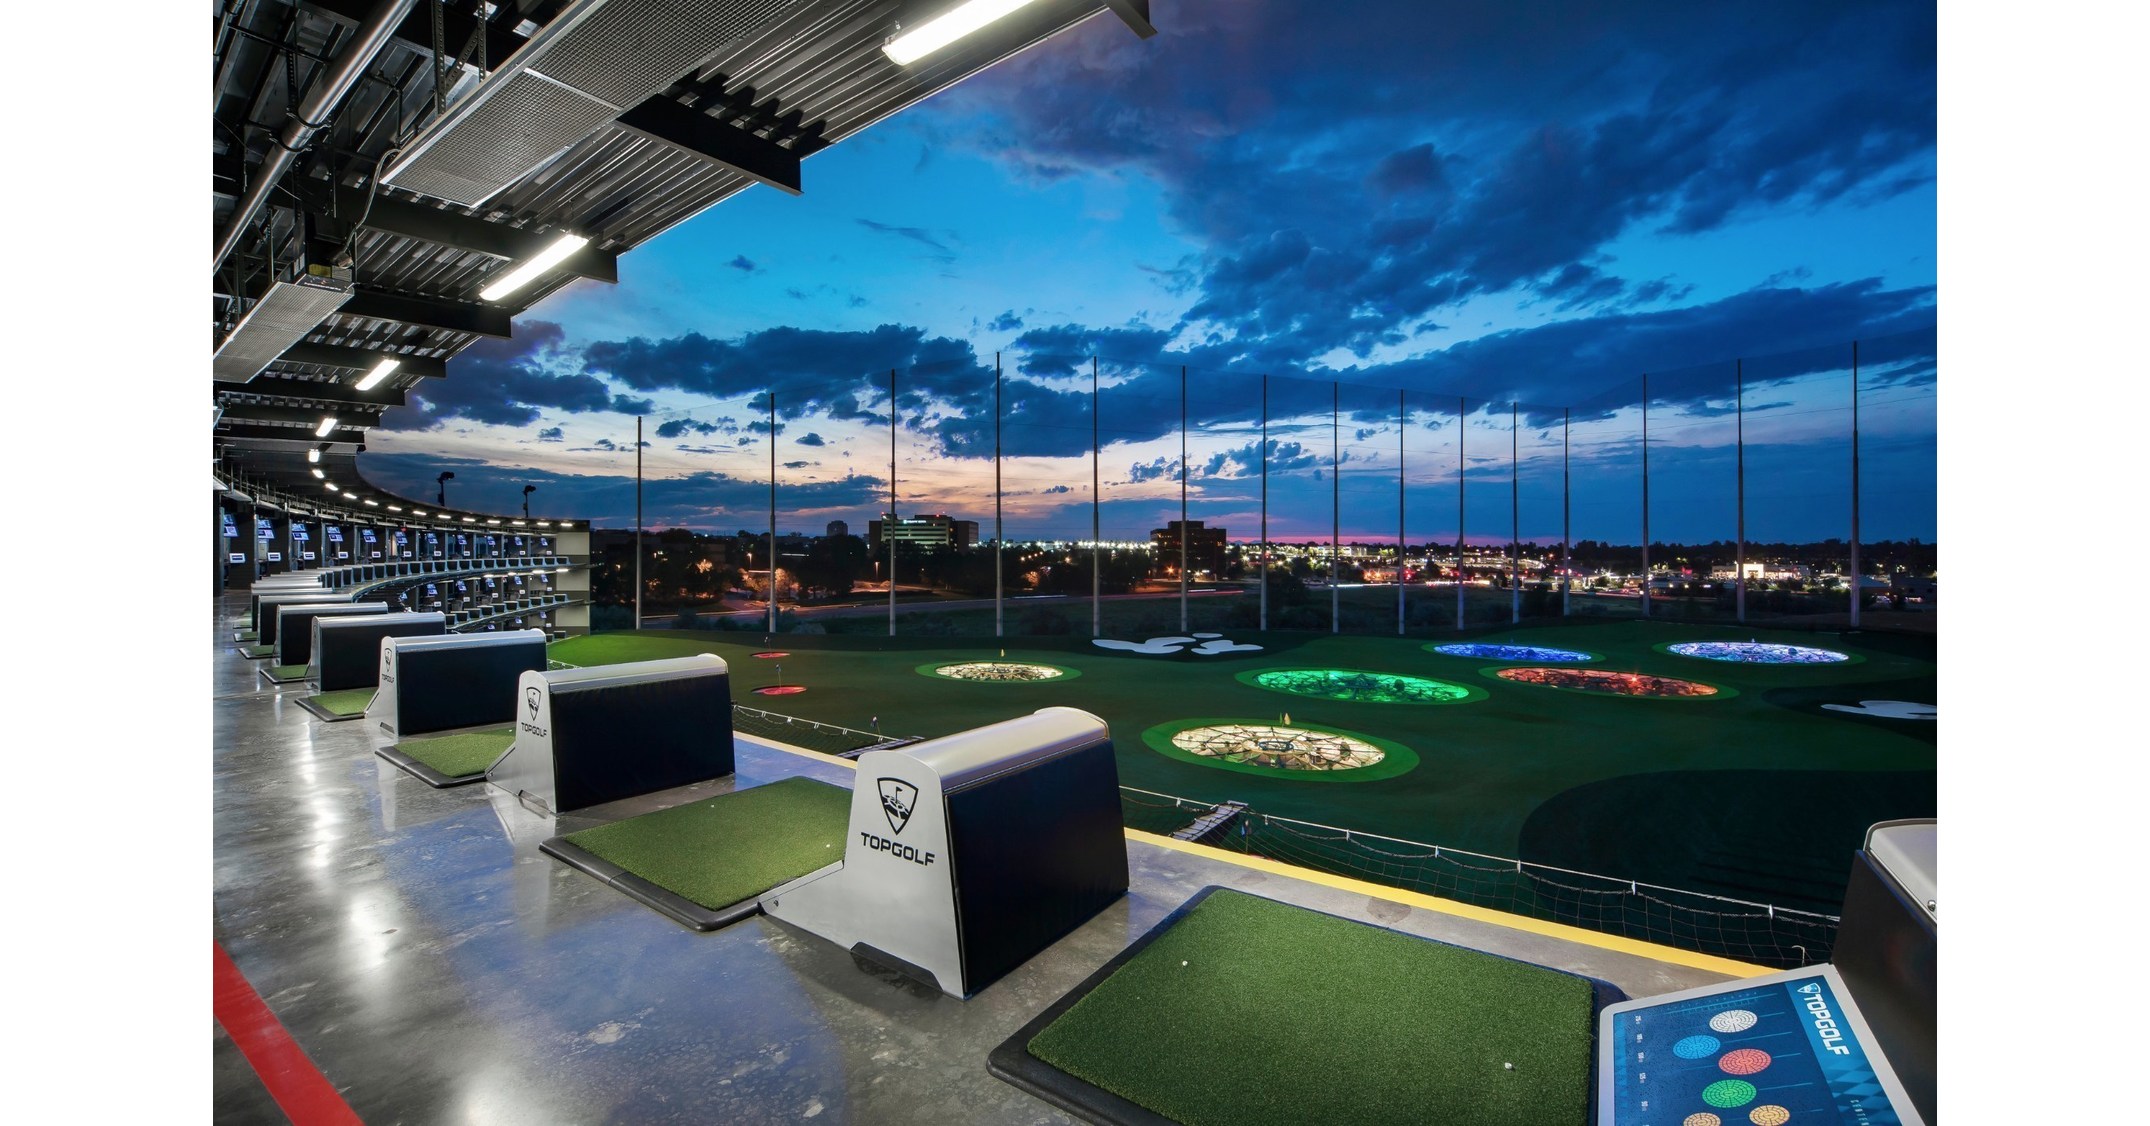 Topgolf opens in St. Petersburg to much excitement